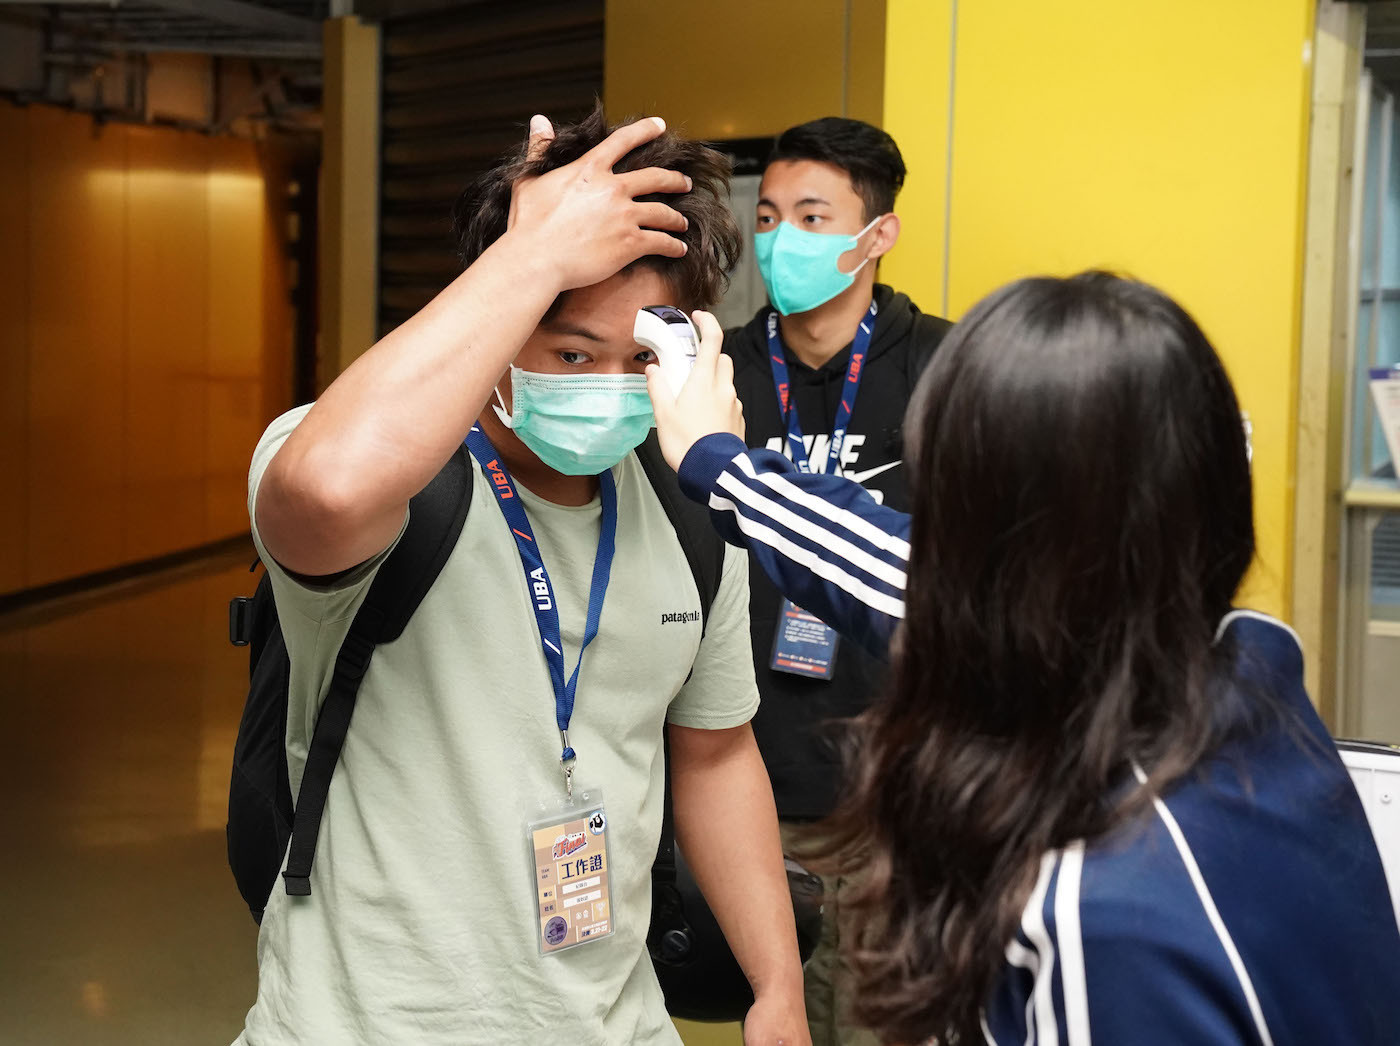 Chinese Taipei University Sports Federation continue with events during COVID-19 pandemic